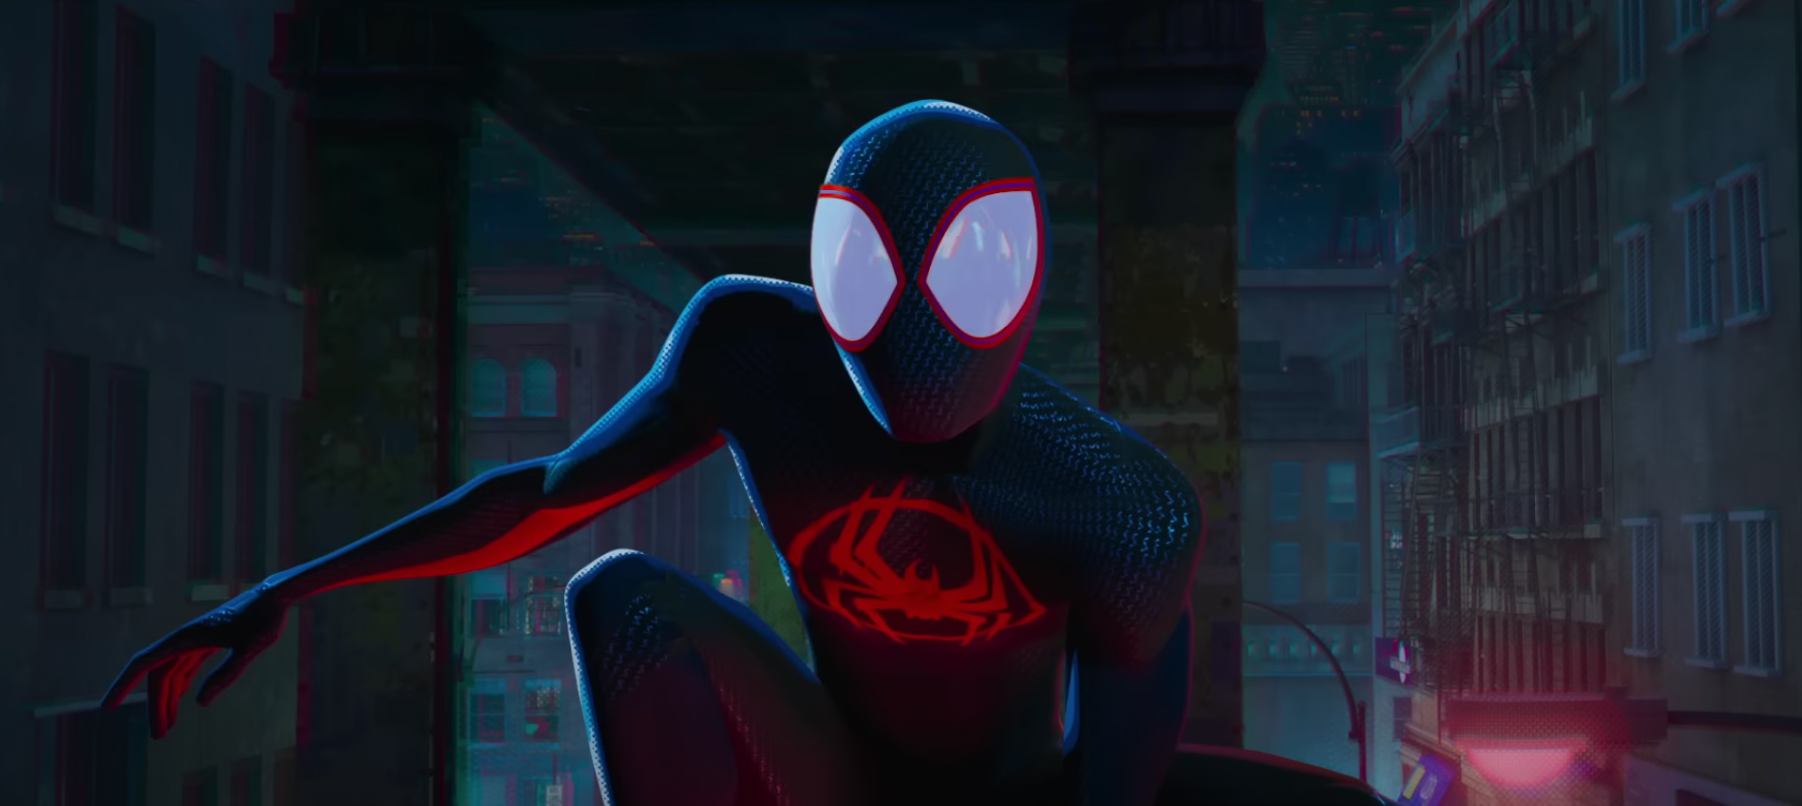 Spider-Man: Beyond the Spider-Verse Will Conclude Miles Morales’ Story